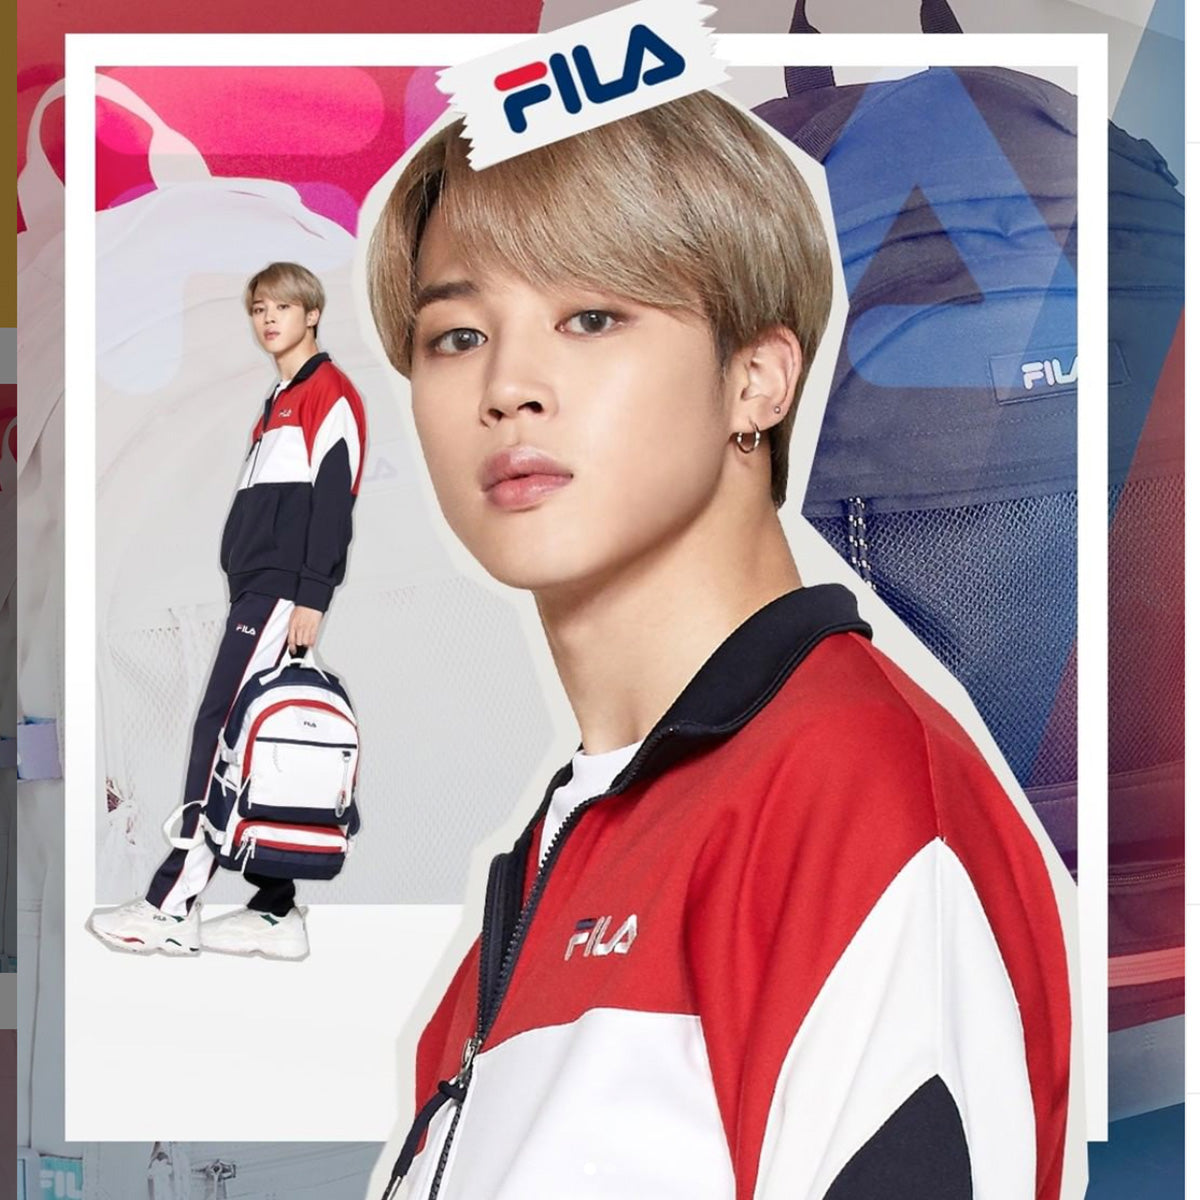 Bts Fila Photoshoot 2020 Discover images and videos about bts ...